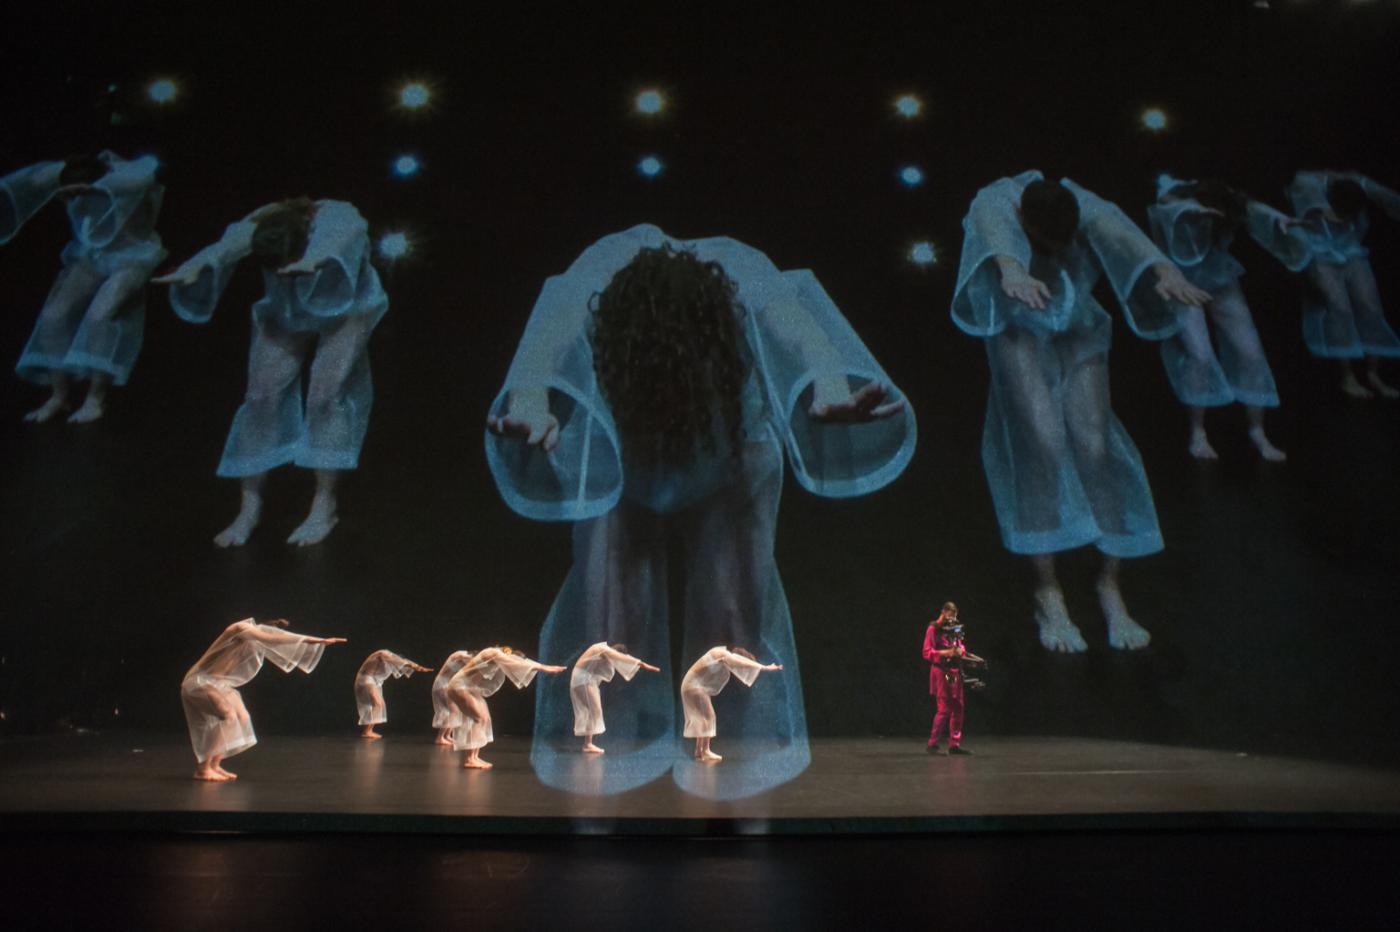 On a stage, six dancers in white and one in read perform beneath a projection of women floating in bell sleaved dresses.